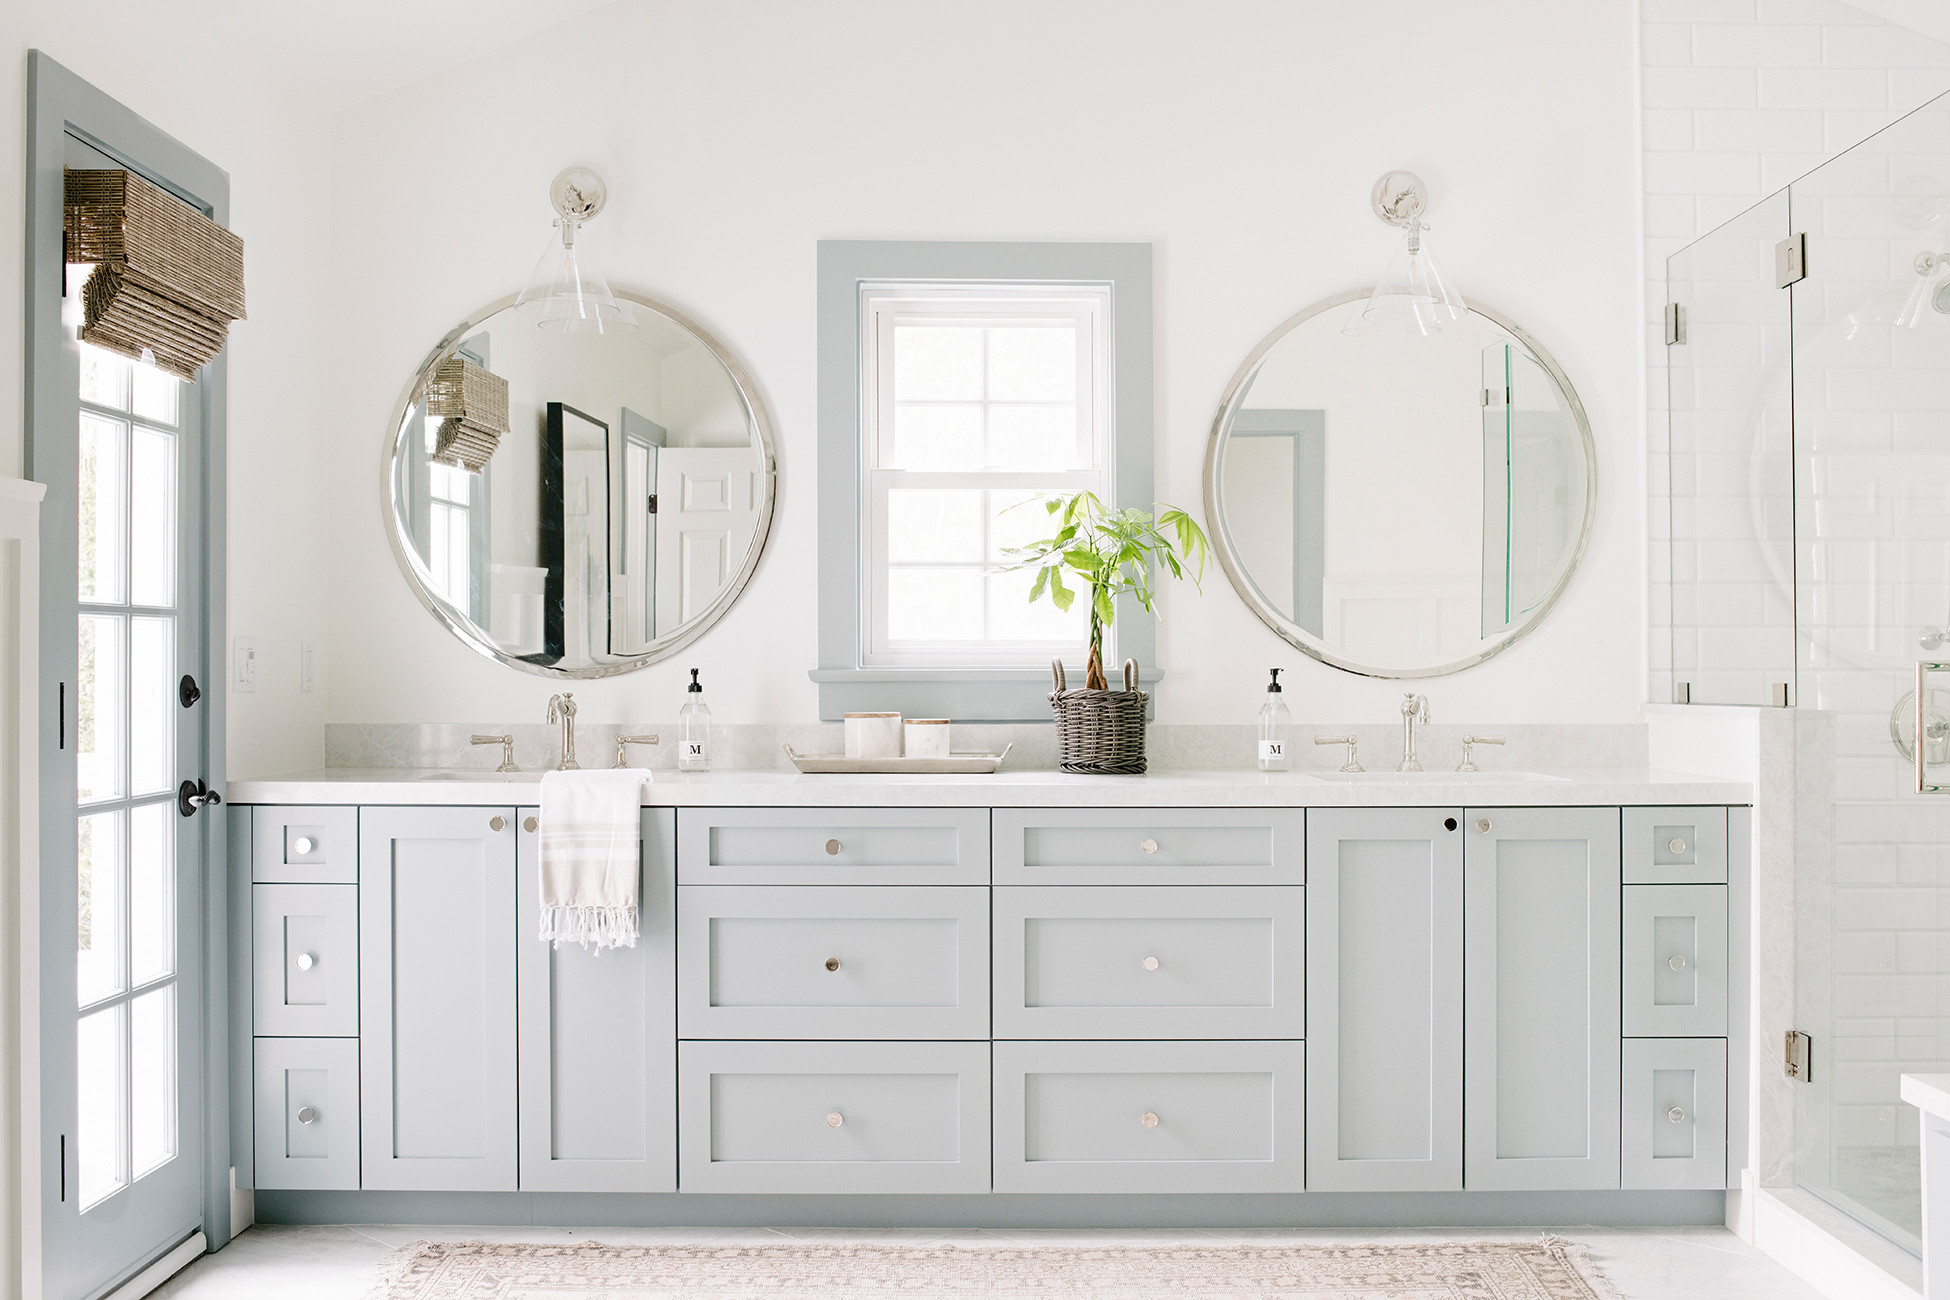 Most Popular Bathroom Colors
 These Are the Most Popular Bathroom Paint Colors for 2020